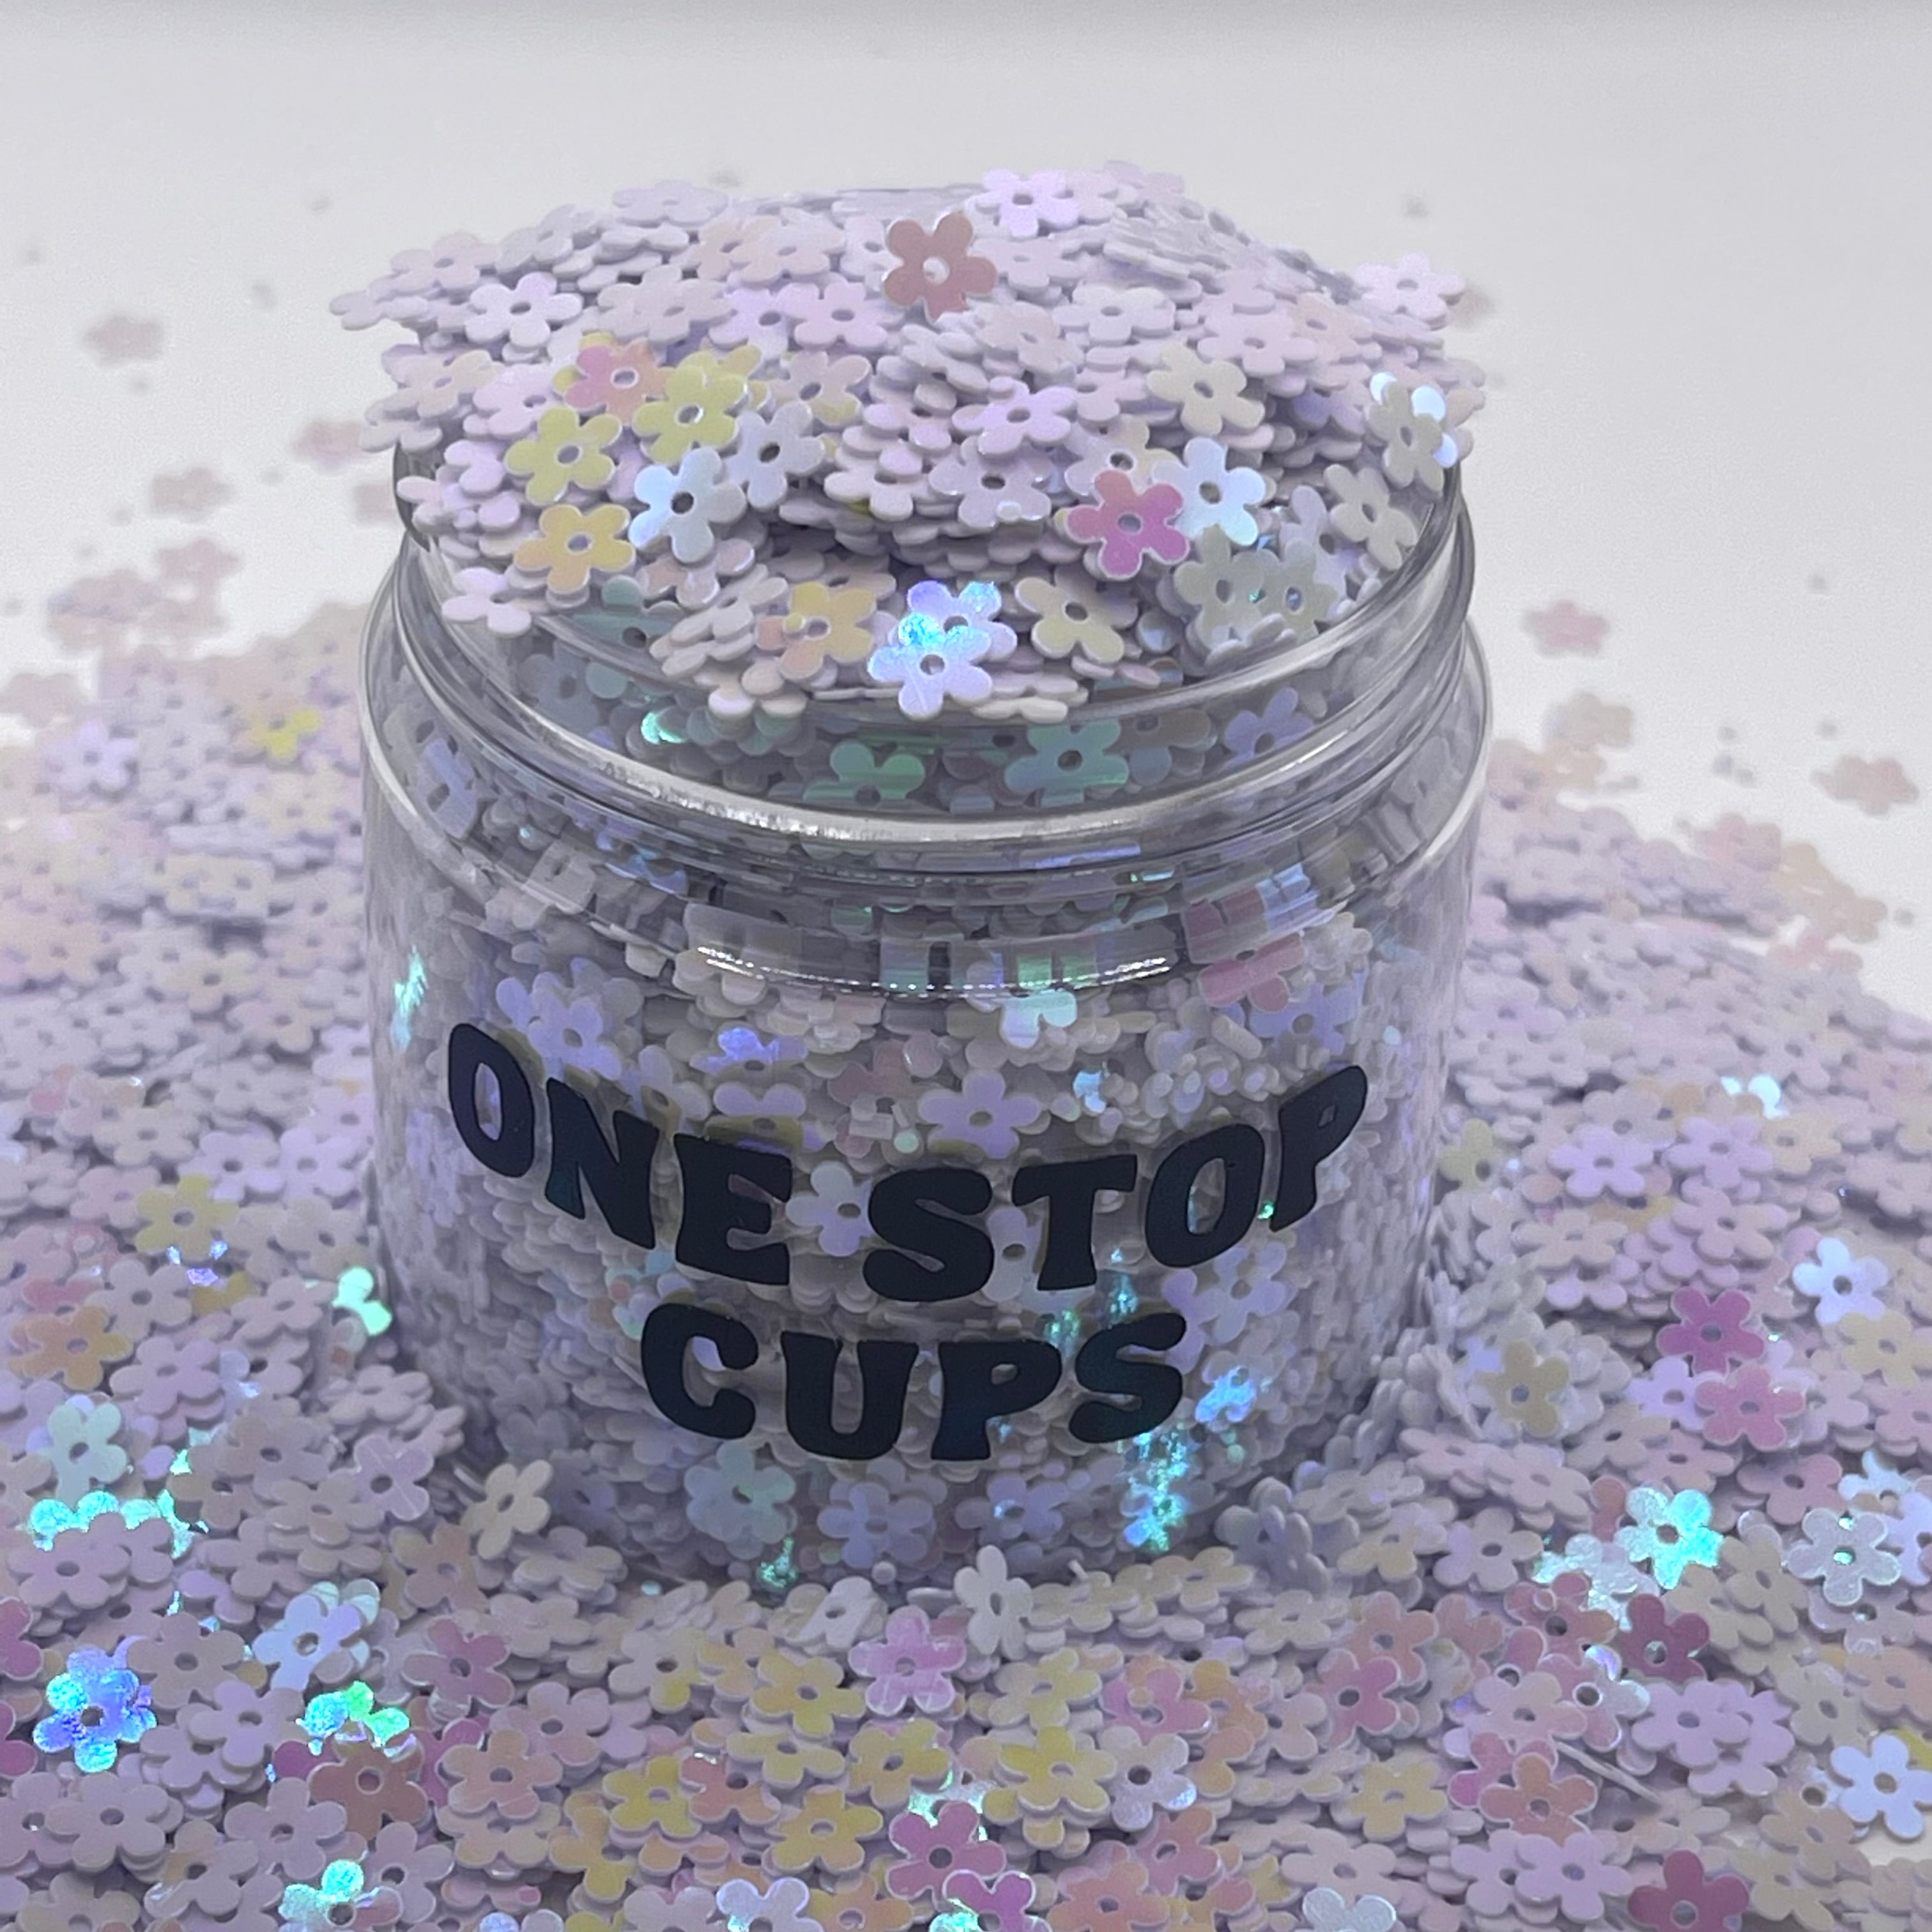 White Flower Shaped Glitter – One Stop Cups